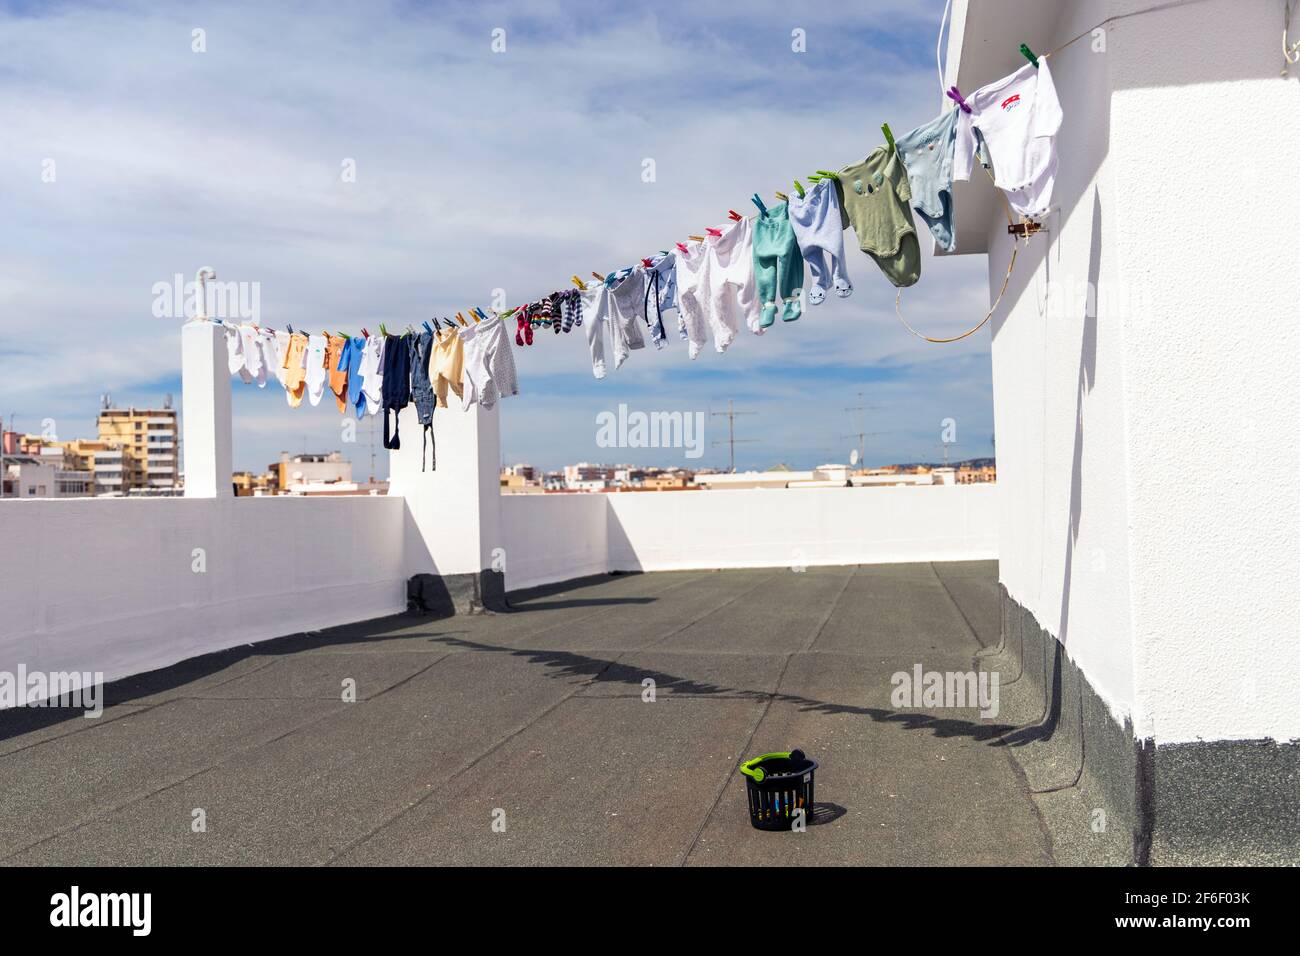 A lot of baby clothes drying on the roof in the city Stock Photo